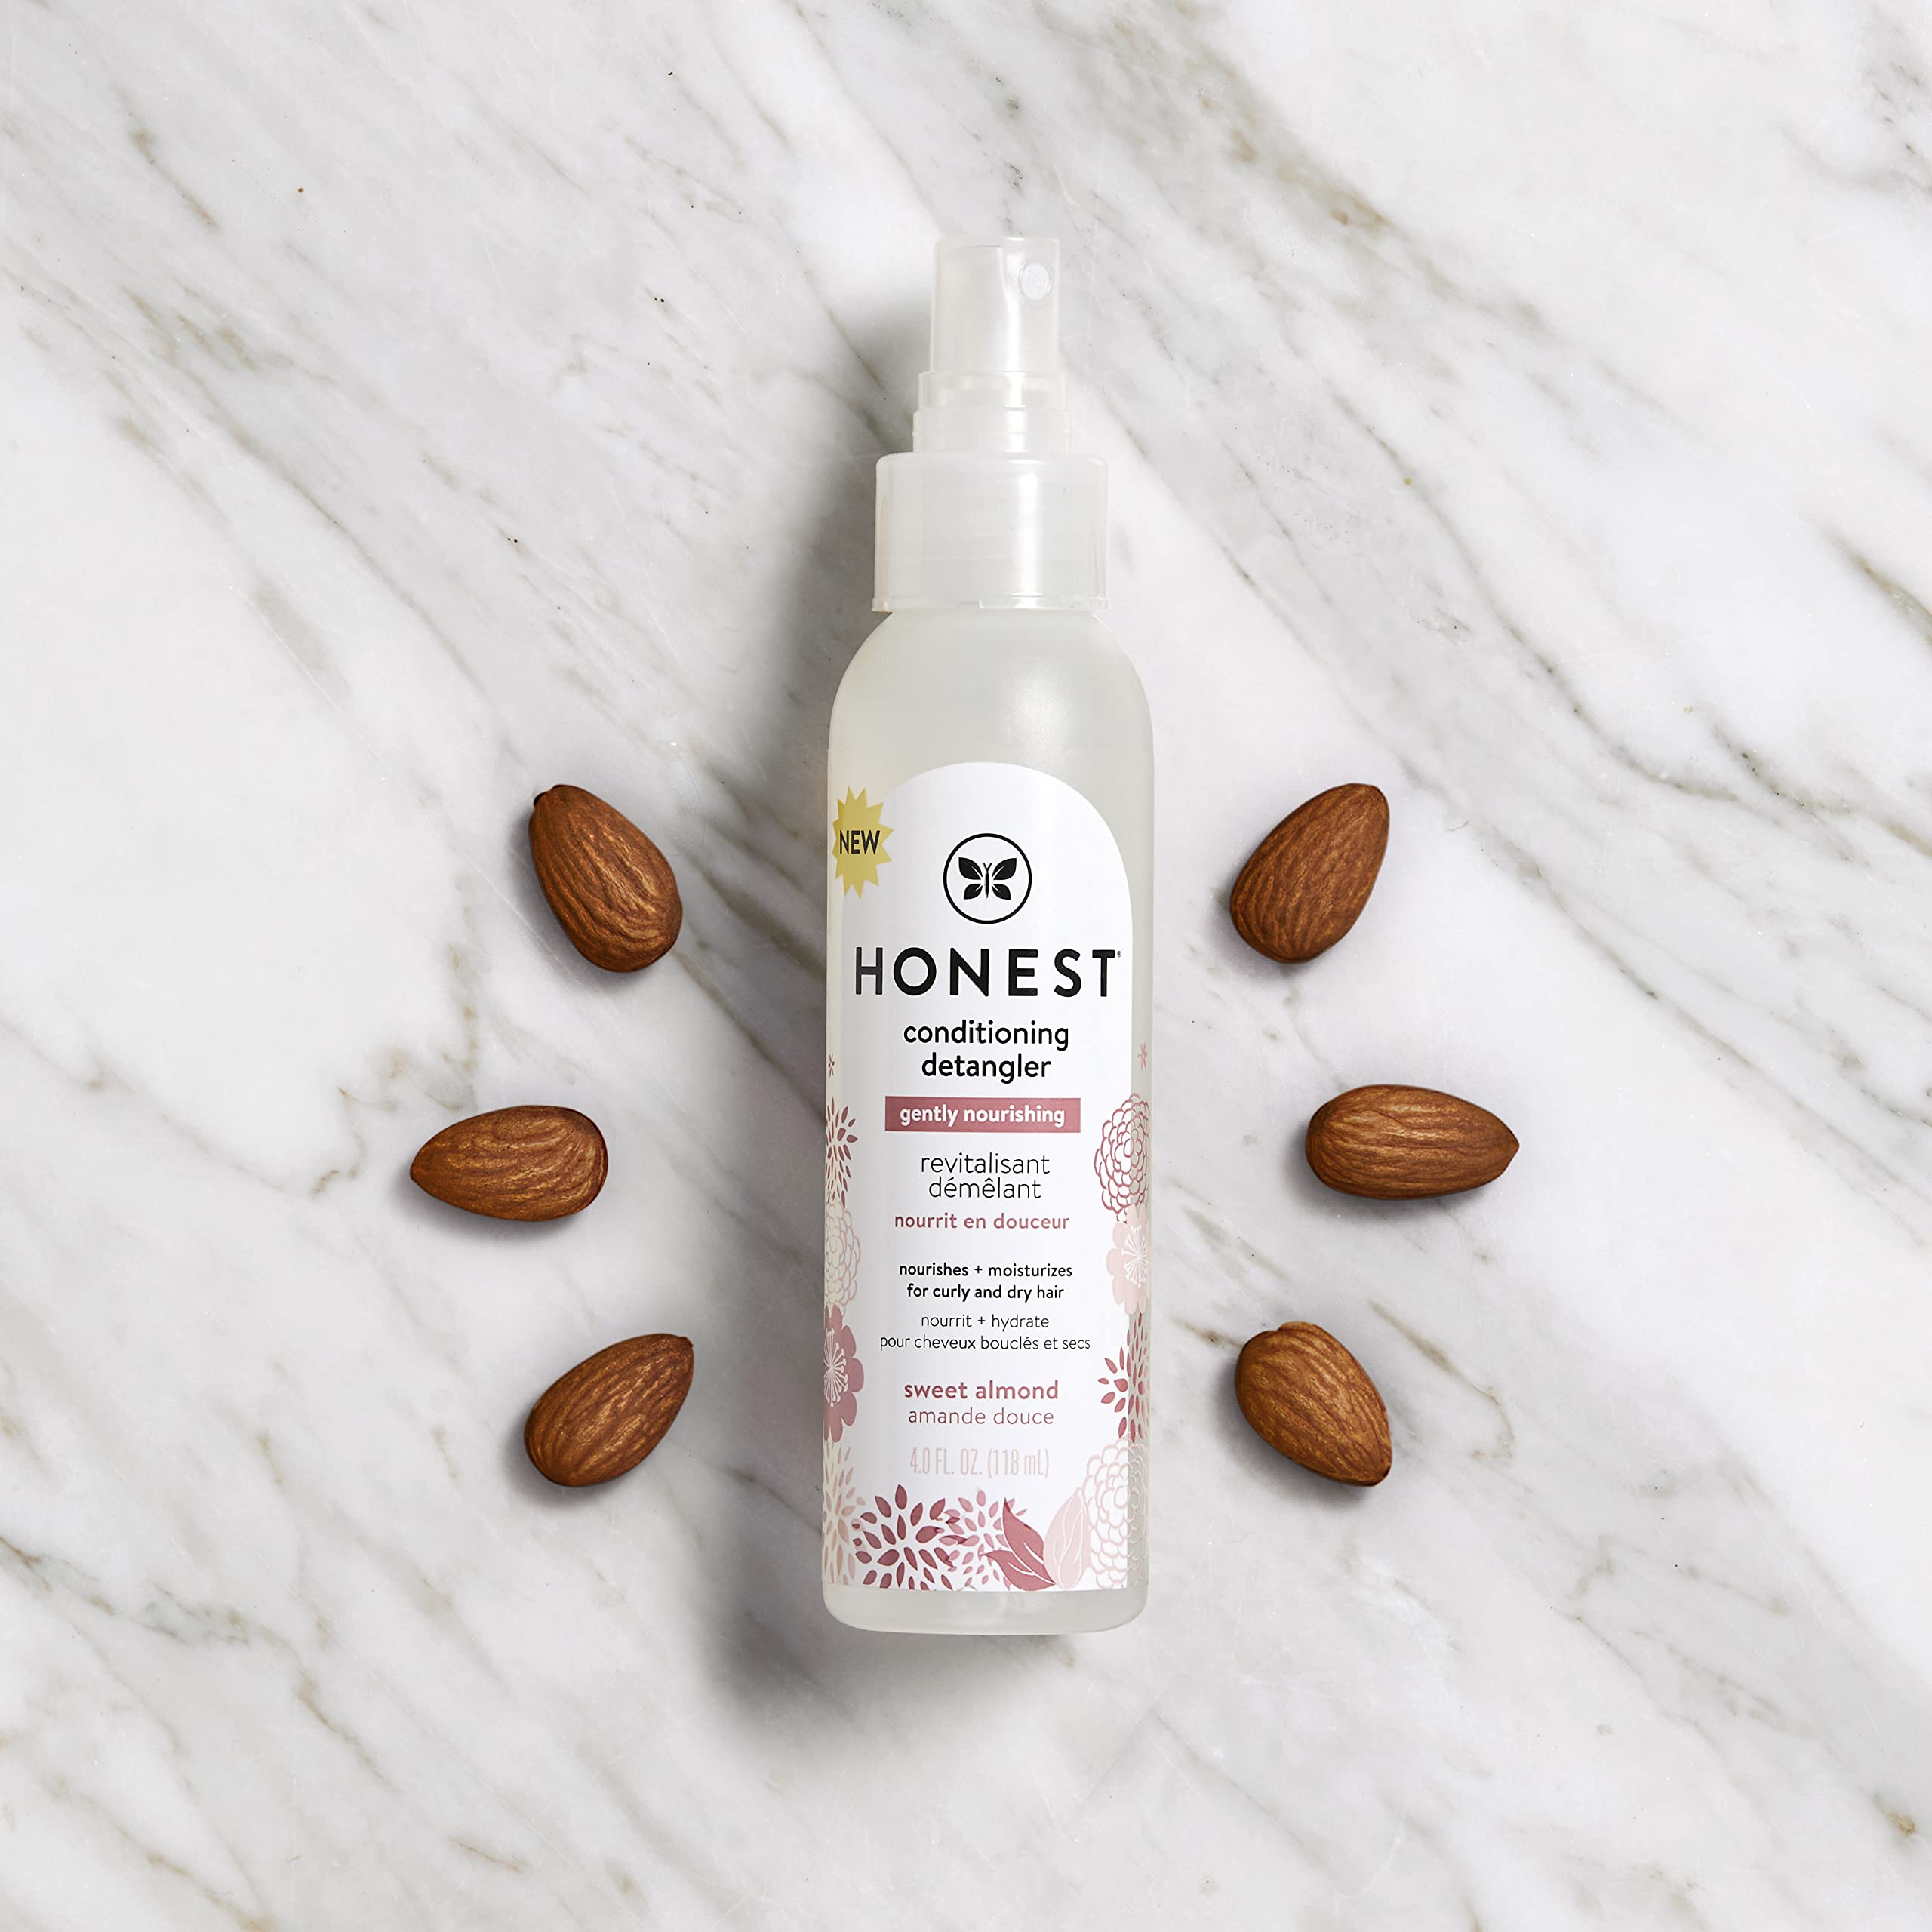 The Honest Company Conditioning Hair Detangler 3-Pack | Leave-in Conditioner + Fortifying Spray | Tear-free, Cruelty-Free, Hypoallergenic | Almond Nourishing, 4 fl oz each (pack of 3)